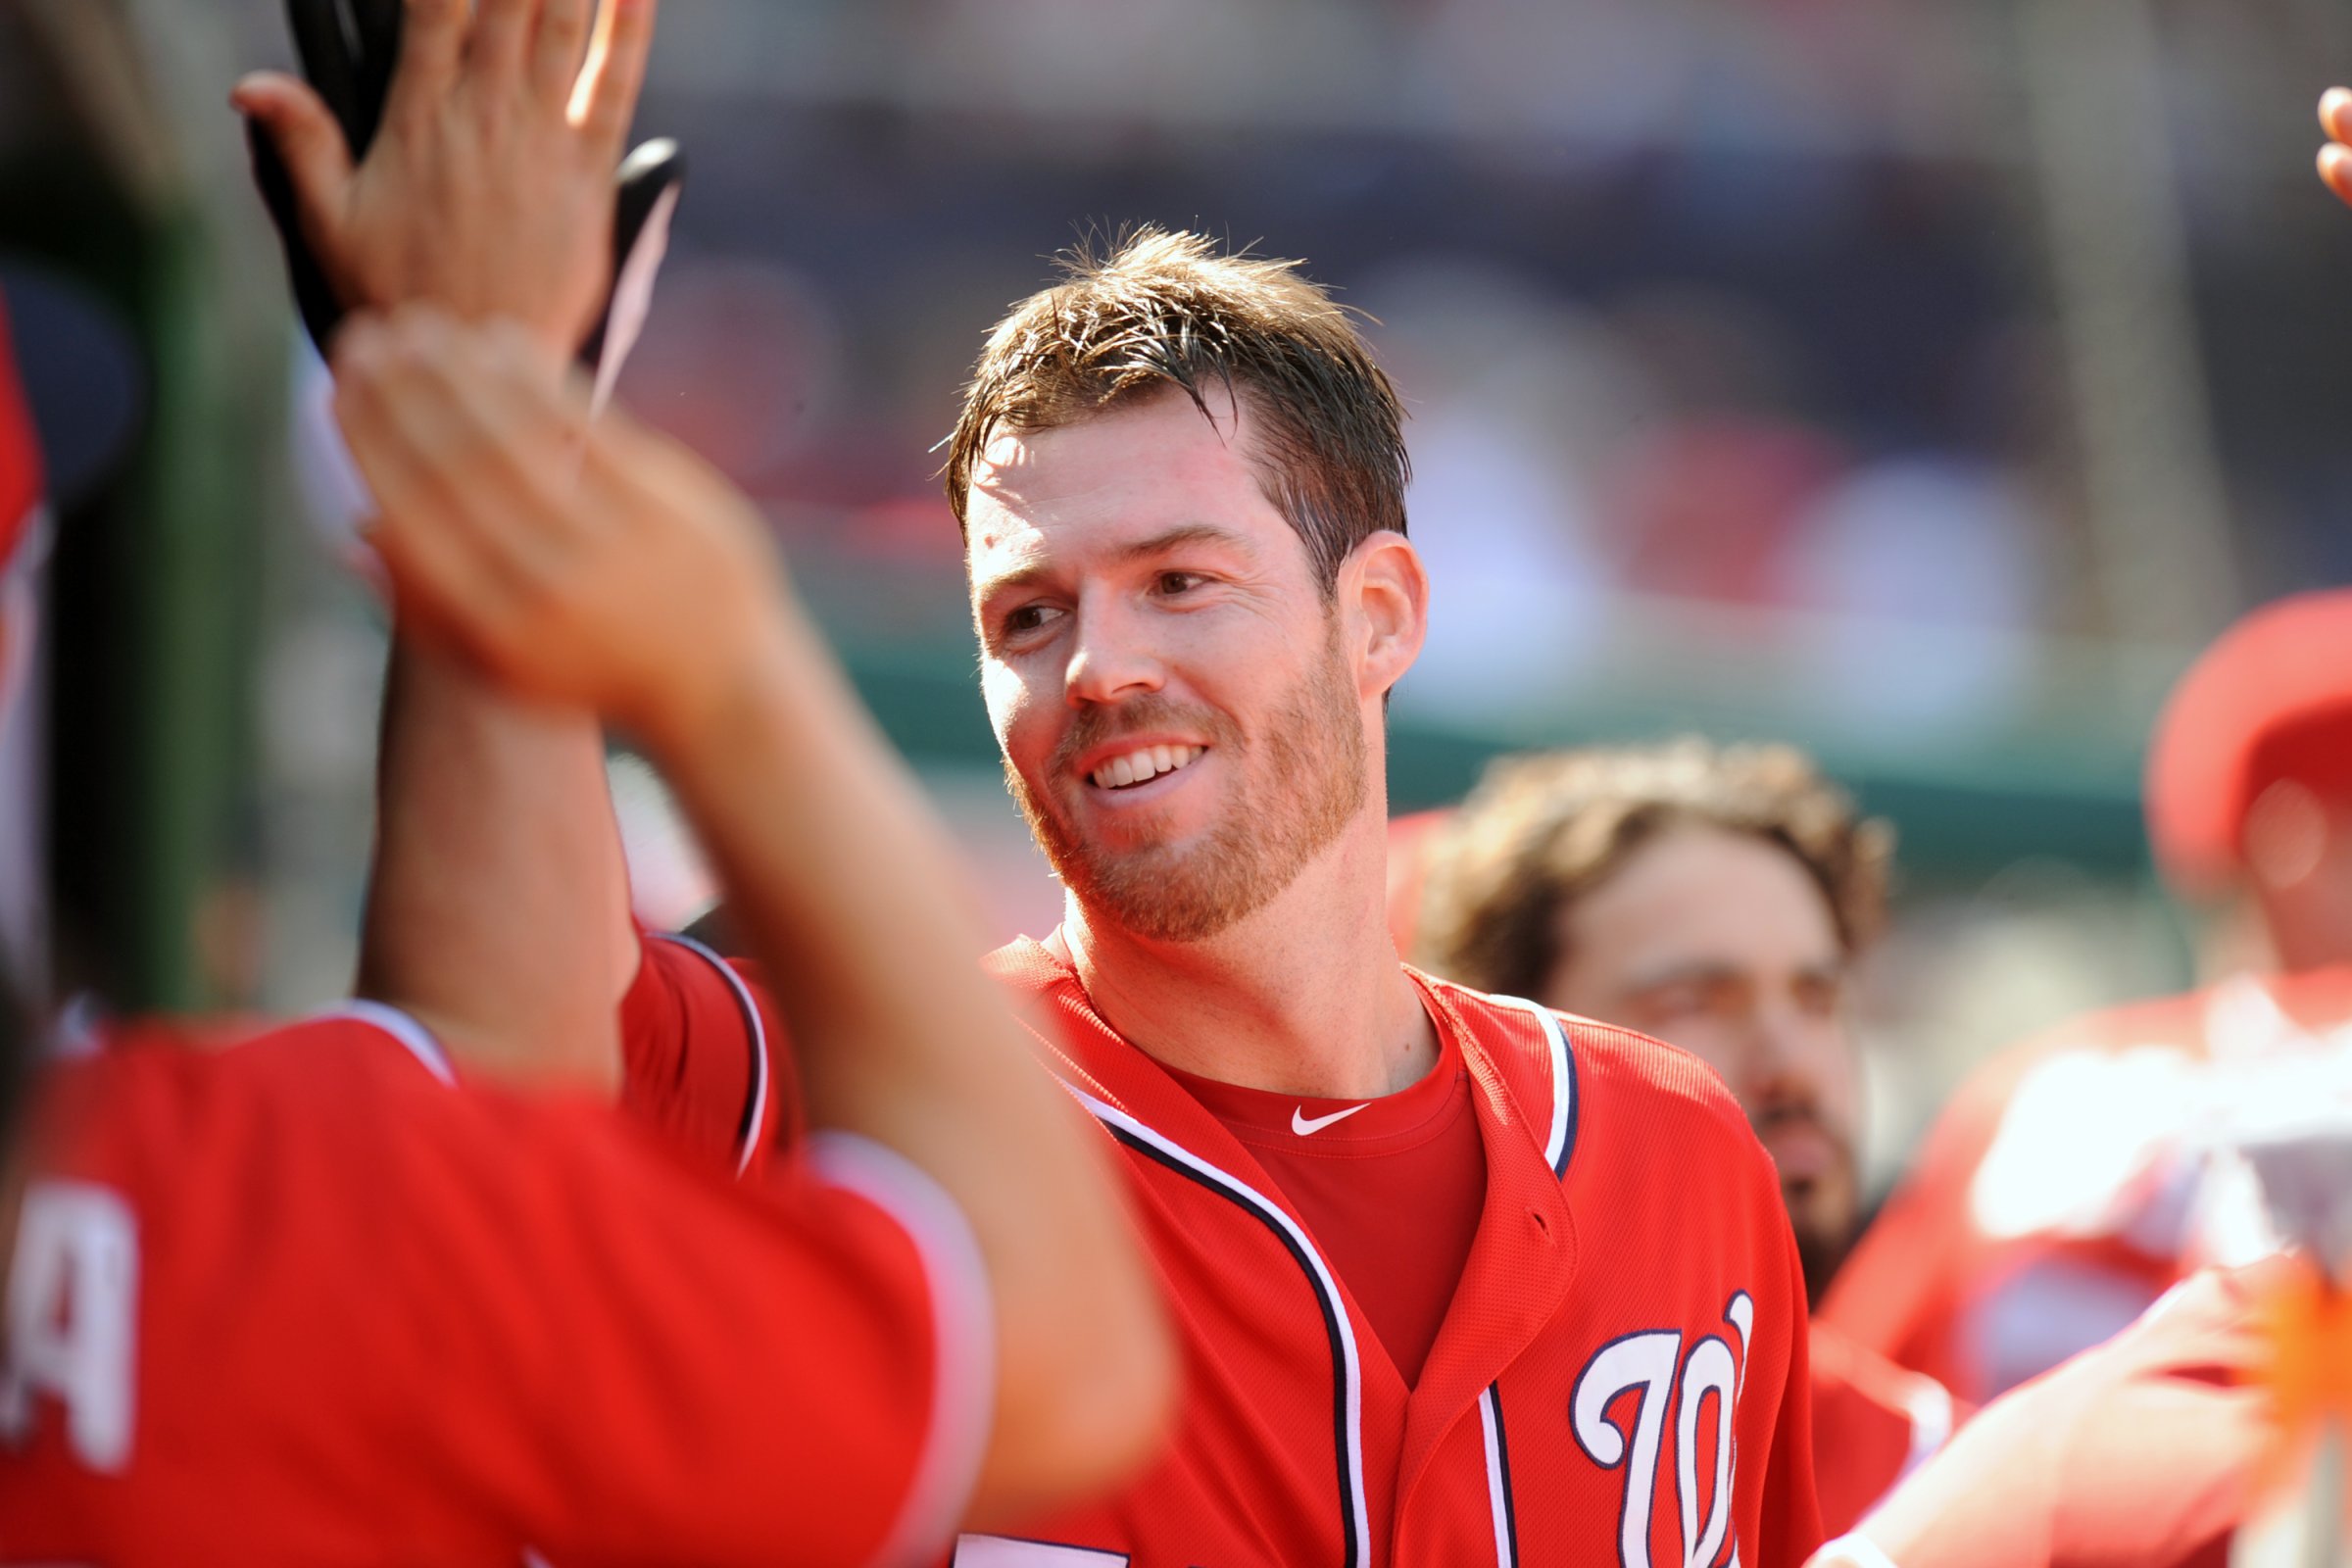 Doug Fister of the Washington Nationals celebrates scoring a run in the sixth inning on a Ryan ZImmerman single during one of a doubleheader against the Miami Marlins on Sept. 26, 2014 at Nationals Park in Washington.